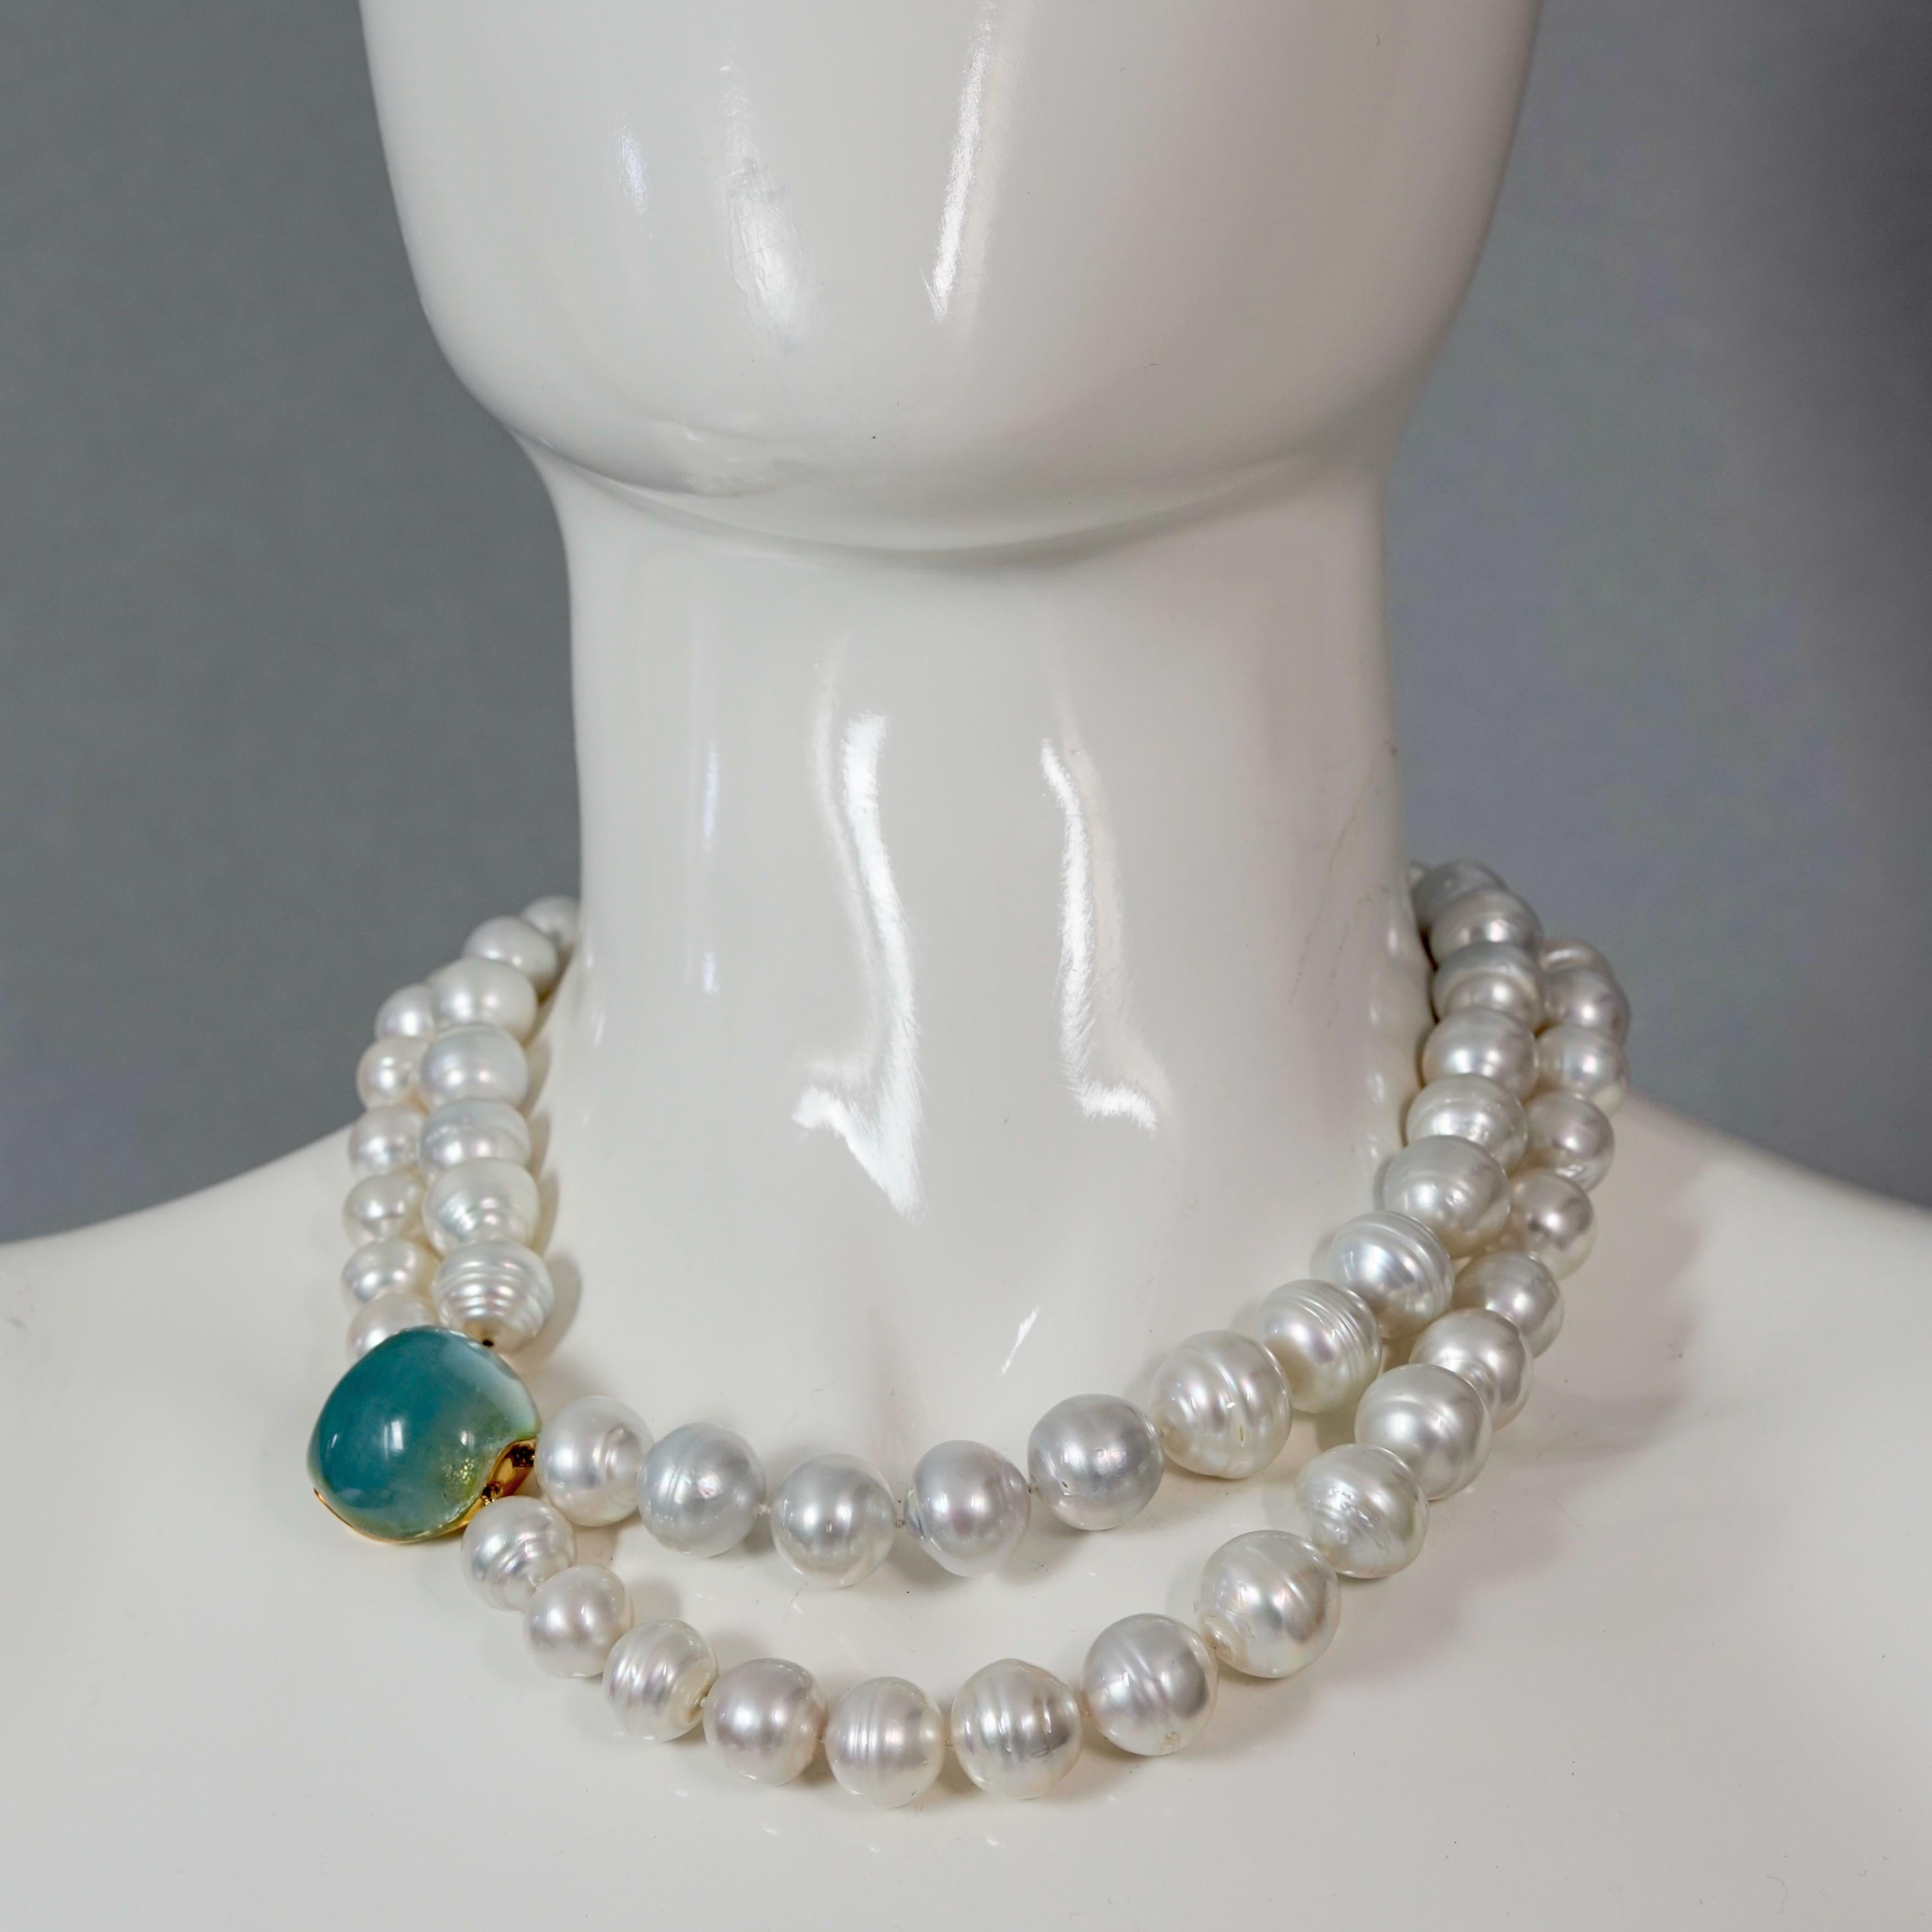 Measurements:
Green Beryl Gemstone: 1.02 inches (2.6 cm)
Large Pearl Diameter: 0.62 inch (1.6 cm)
Small Pearl Diameter: 0.39 inch (1 cm)
Height Drop: 1.10 inches (2.8 cm)
Wearable Length: 17.91 inches (45.5 cm)

A sumptuous assemblage of lustrous,